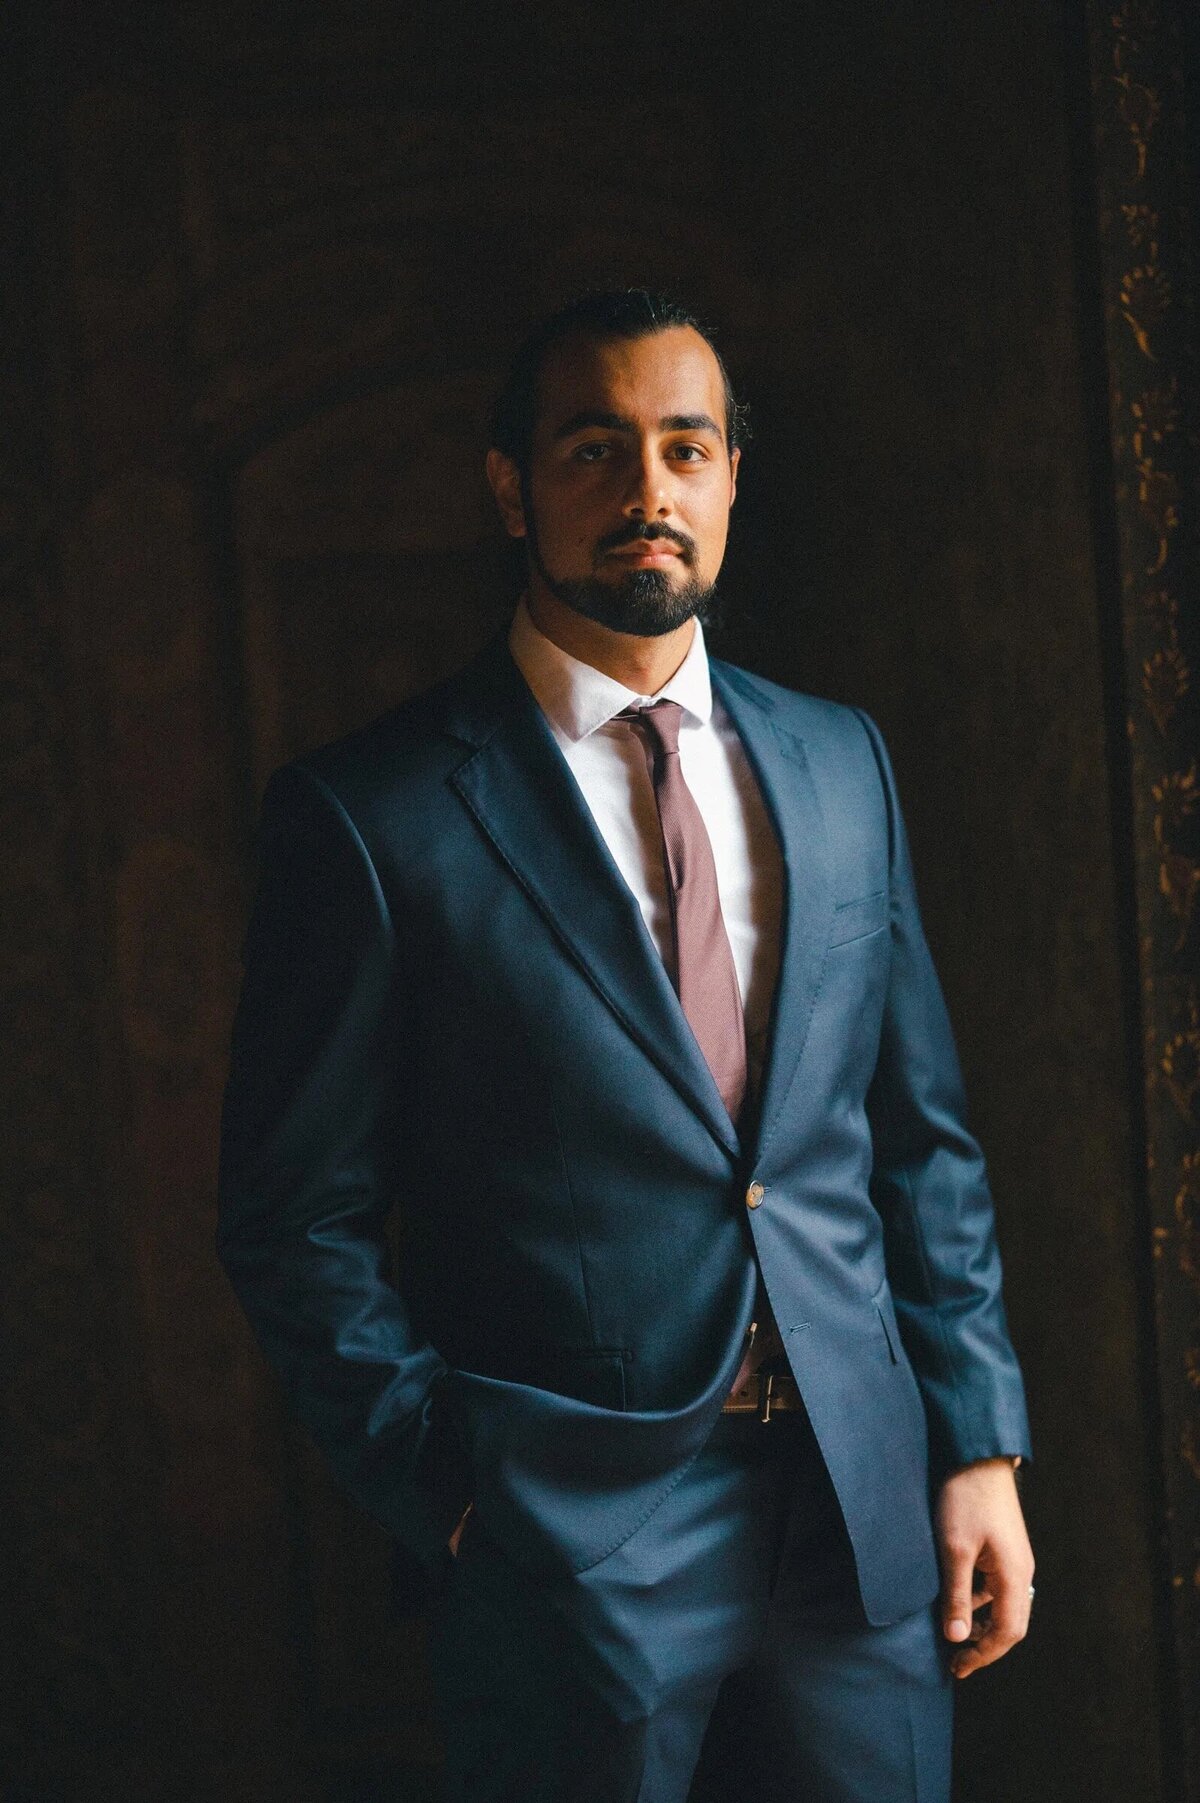 A groom in a blue suit standing confidently, his hands in pockets, against a richly textured dark background, exuding suave sophistication.